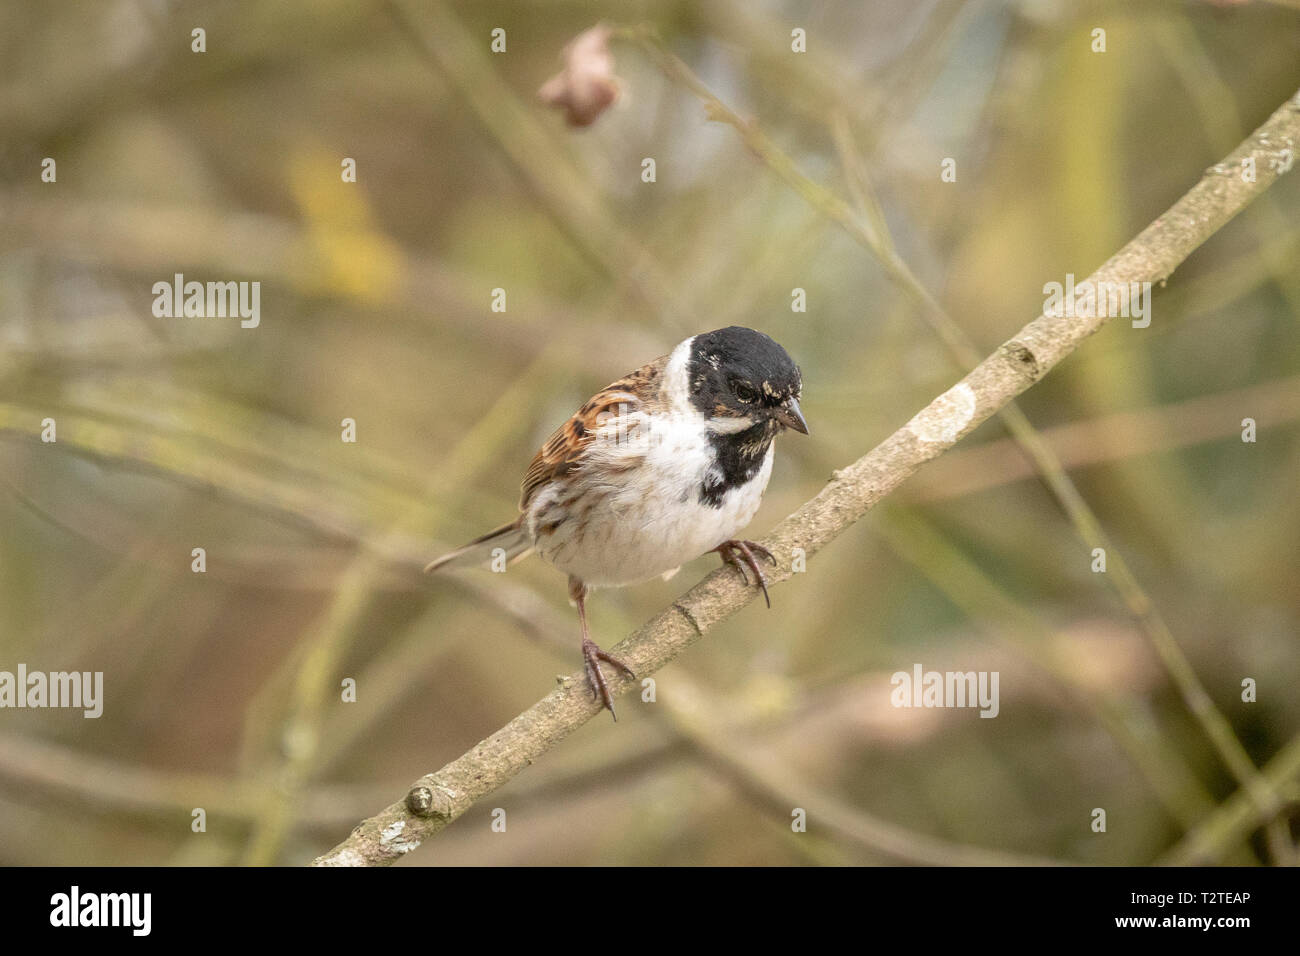 Reed bunting (Emberiza schoeniclus) perched in natural woodland surroundings Stock Photo